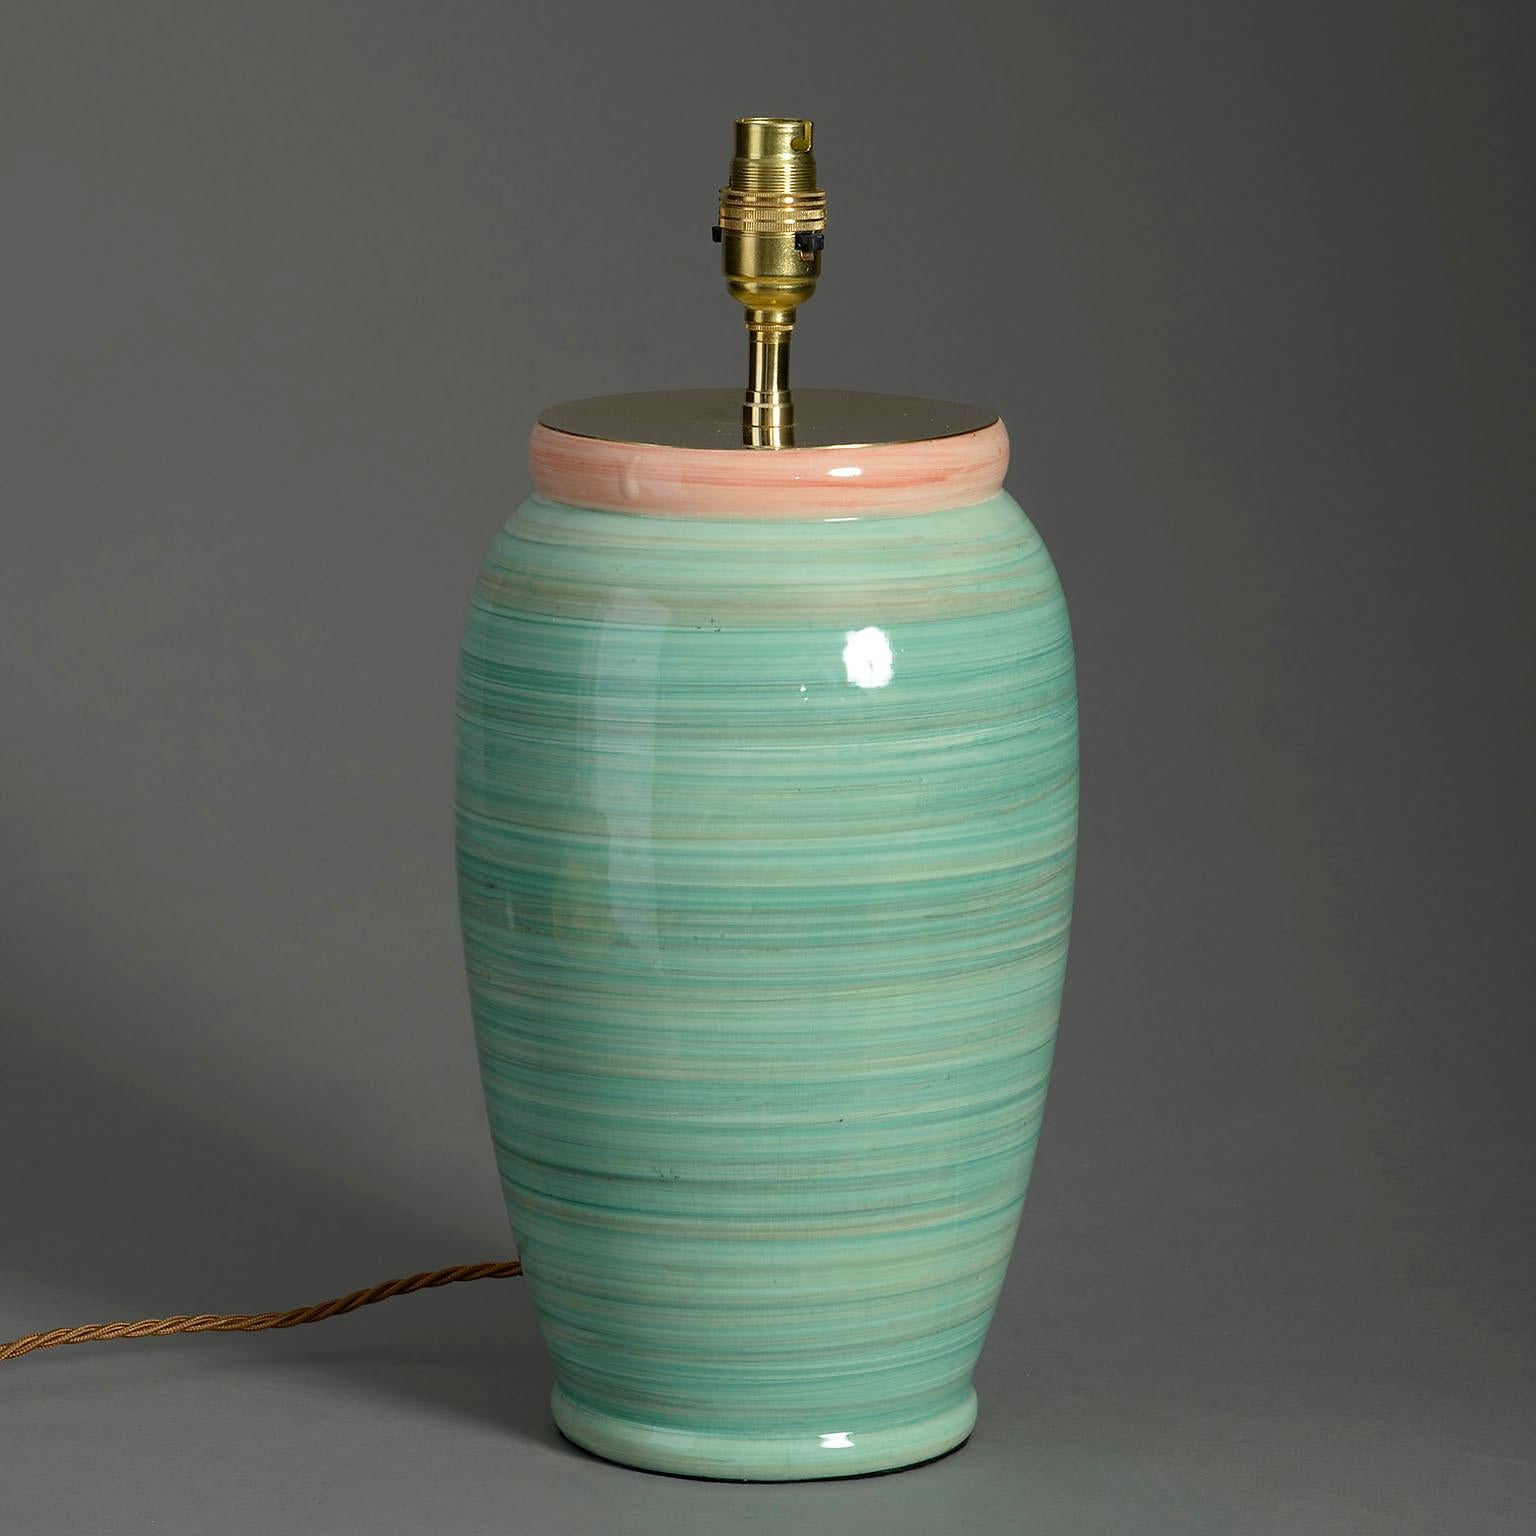 A mid-20th century green glazed pottery vase of good scale, now mounted as a table lamp.

Dimensions refer to ceramic elements only.

Display shade not included.